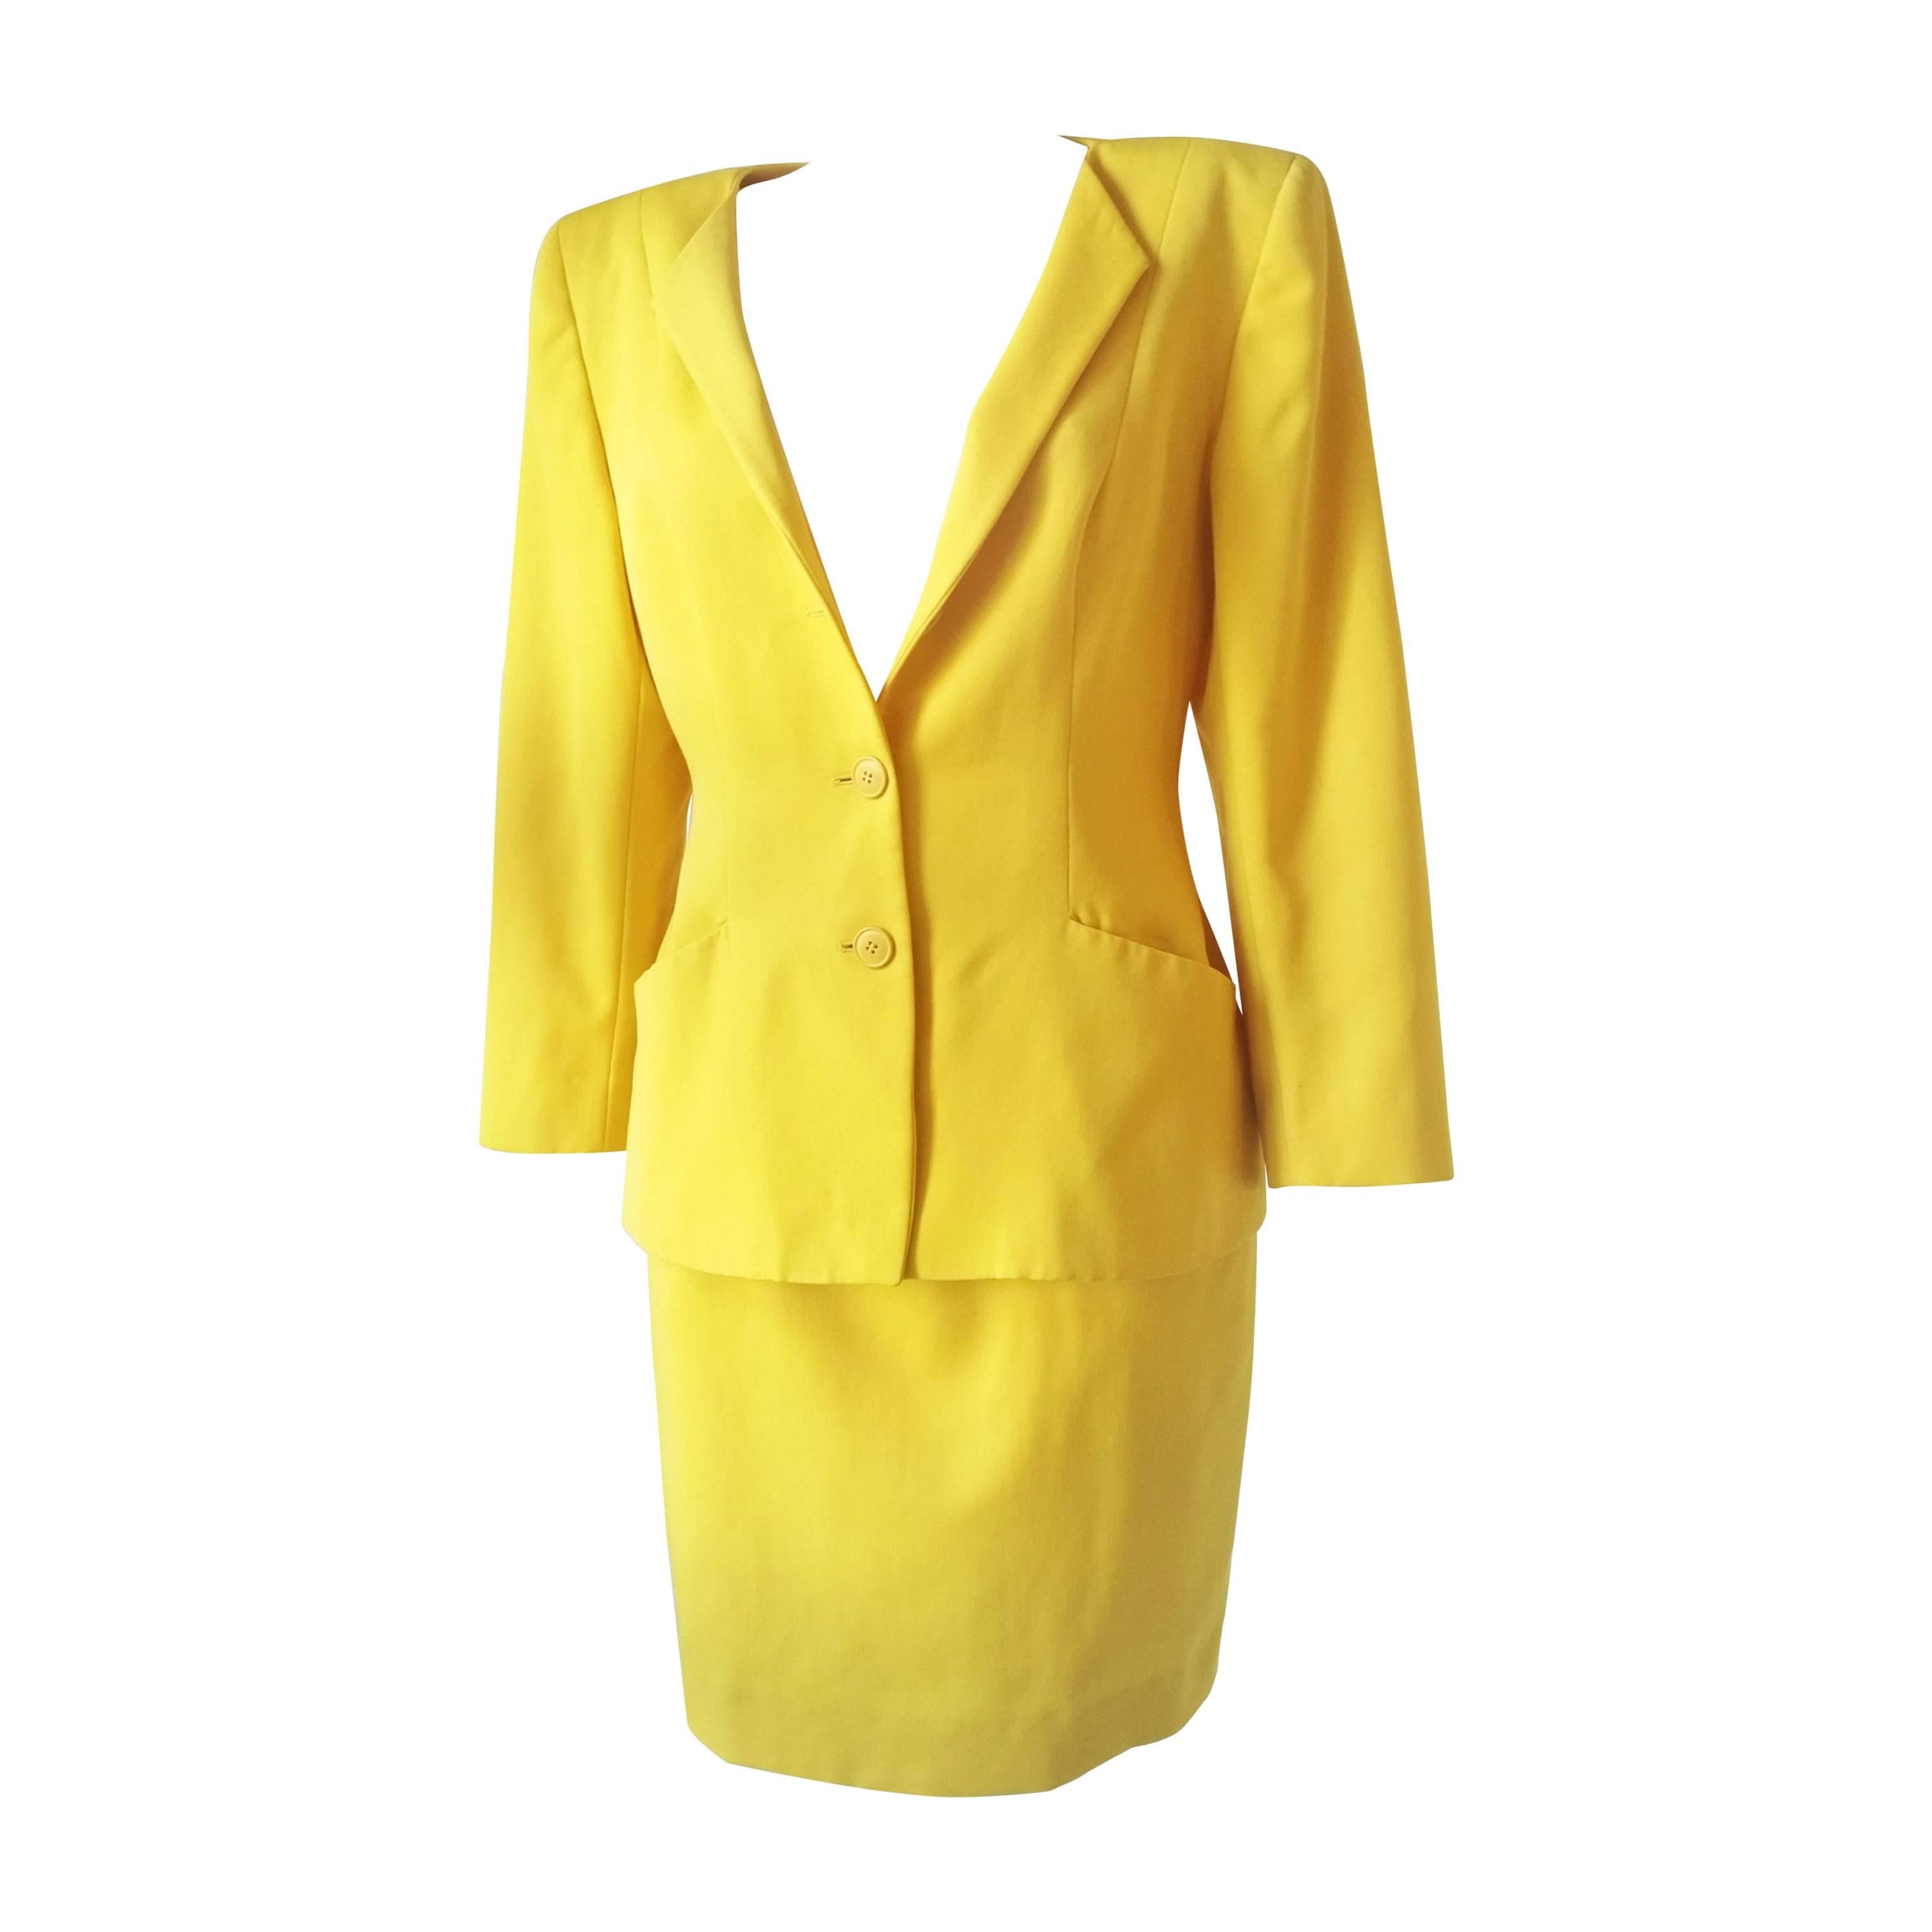 1980s Christian Dior yellow suit 